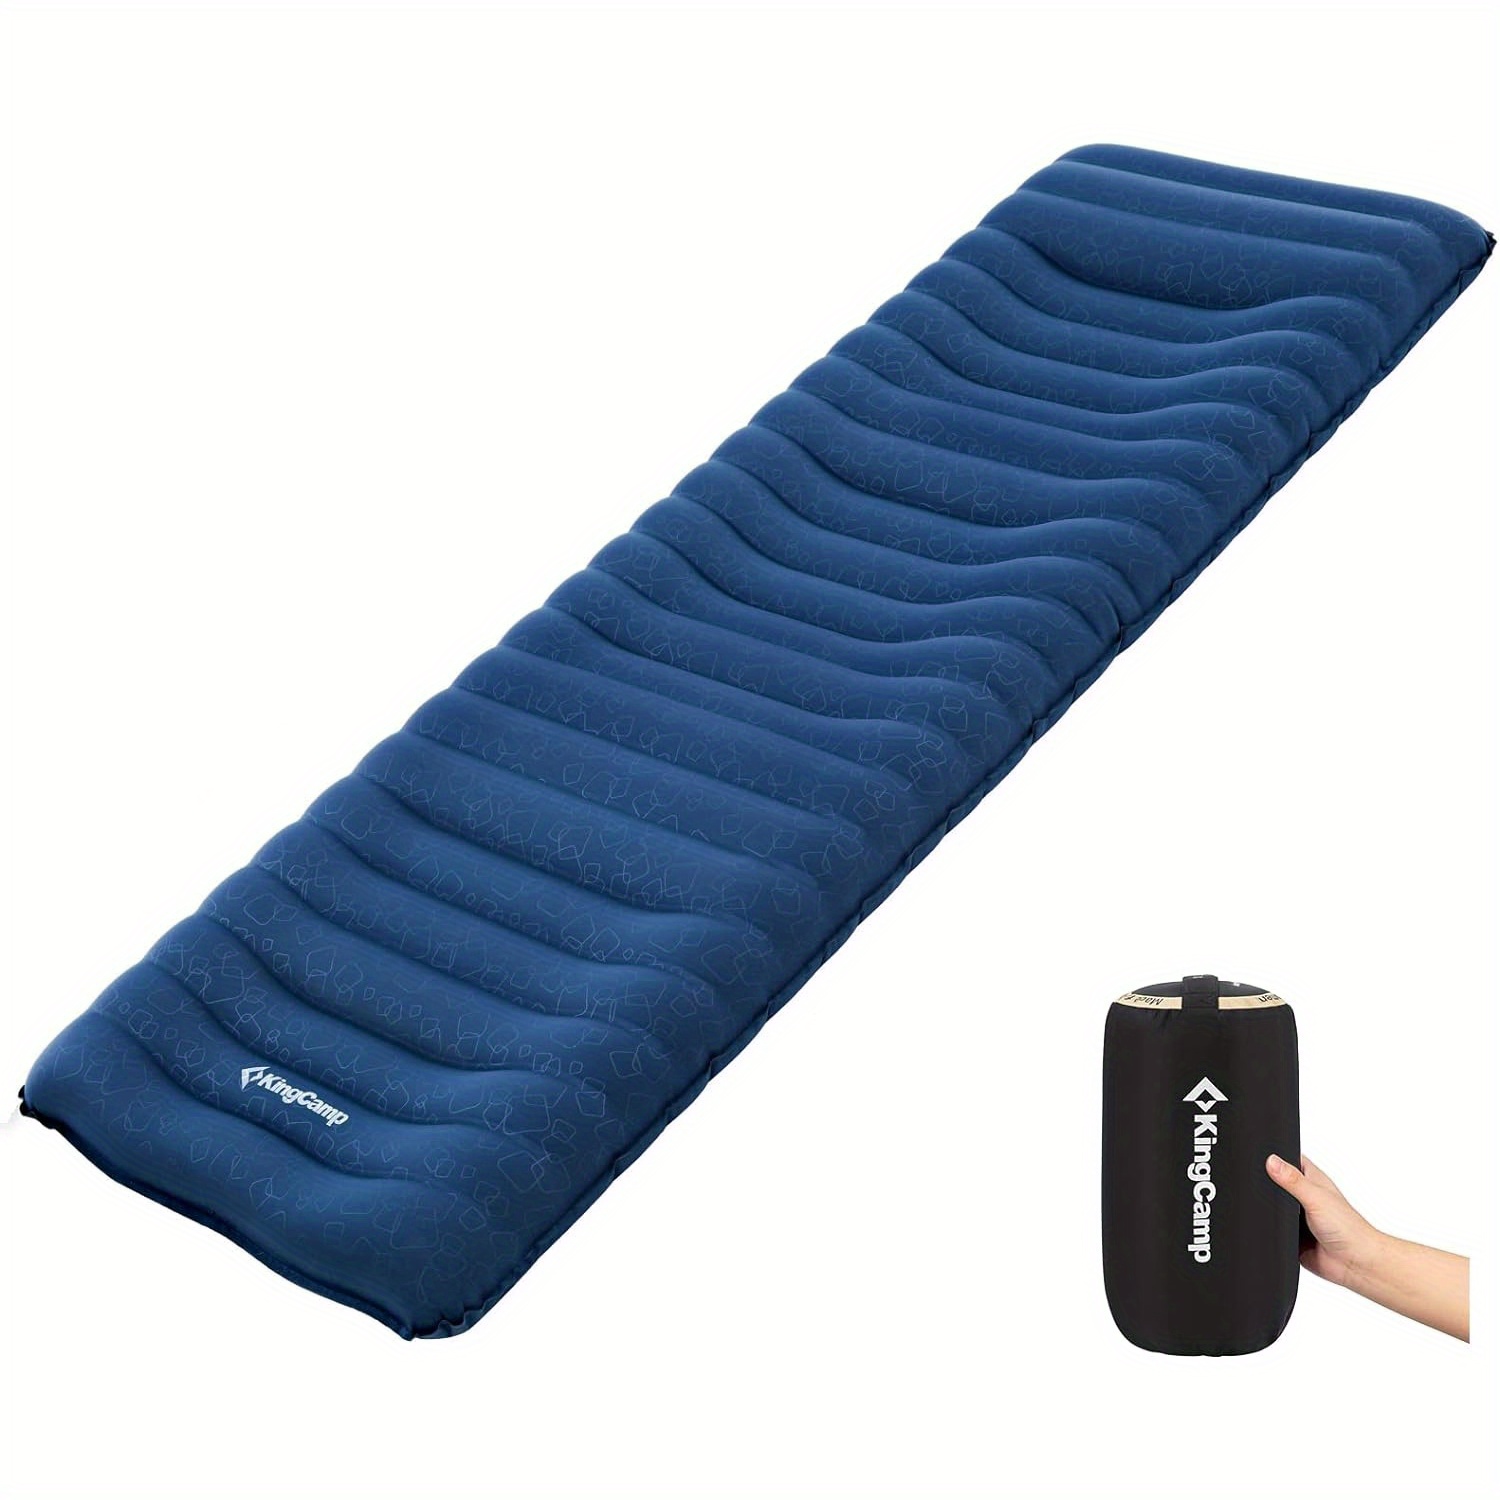 

Kingcamp Camping Mattress, Inflatable Ultralight Air Cushion, Ergonomic Design, Built-in Pillow 4 Inches (about 10.2cm) Suitable For Backpacking And Hiking